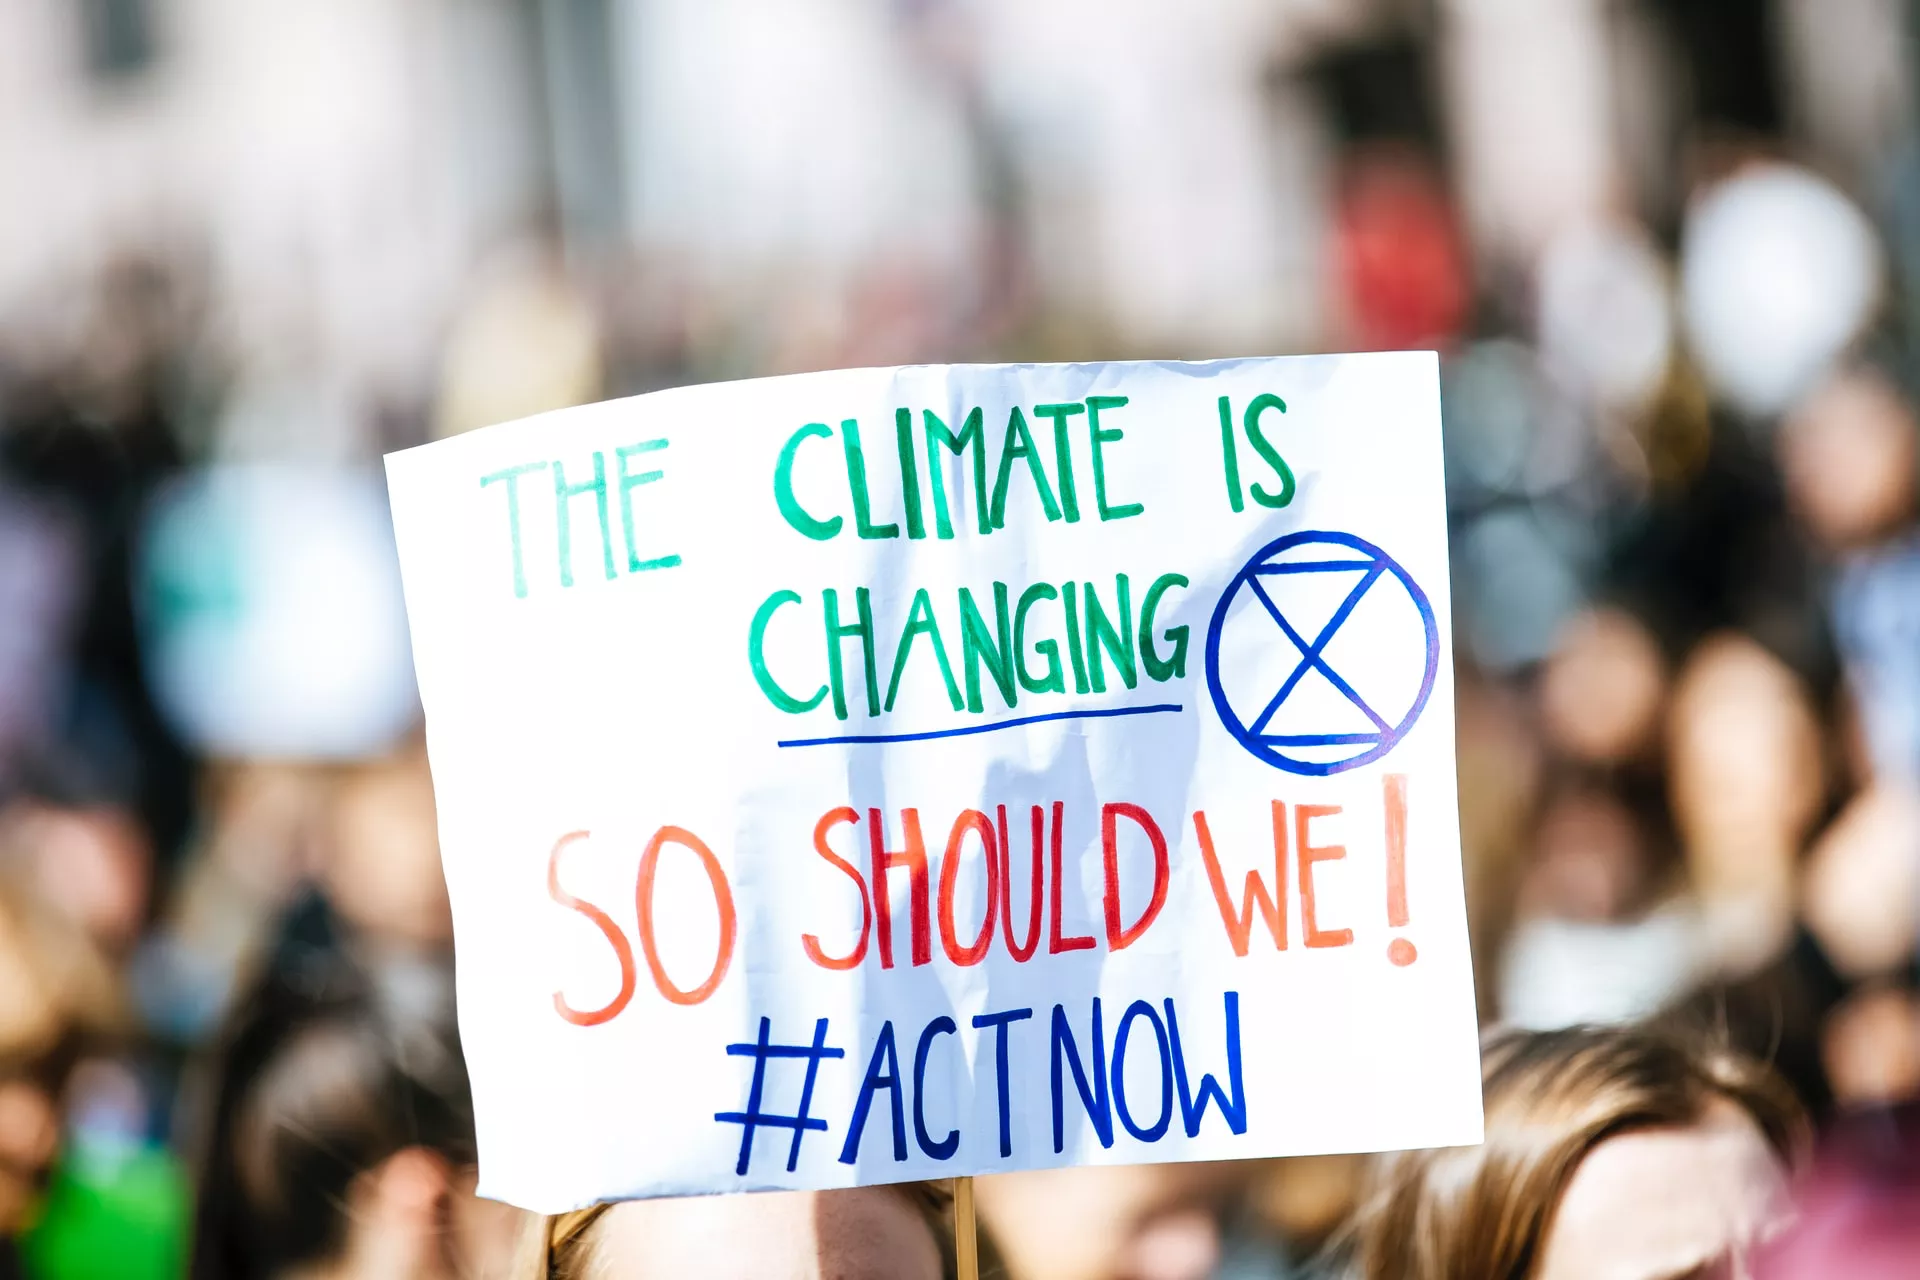 IPCC AR6: Stark warnings from scientists, impetus for action